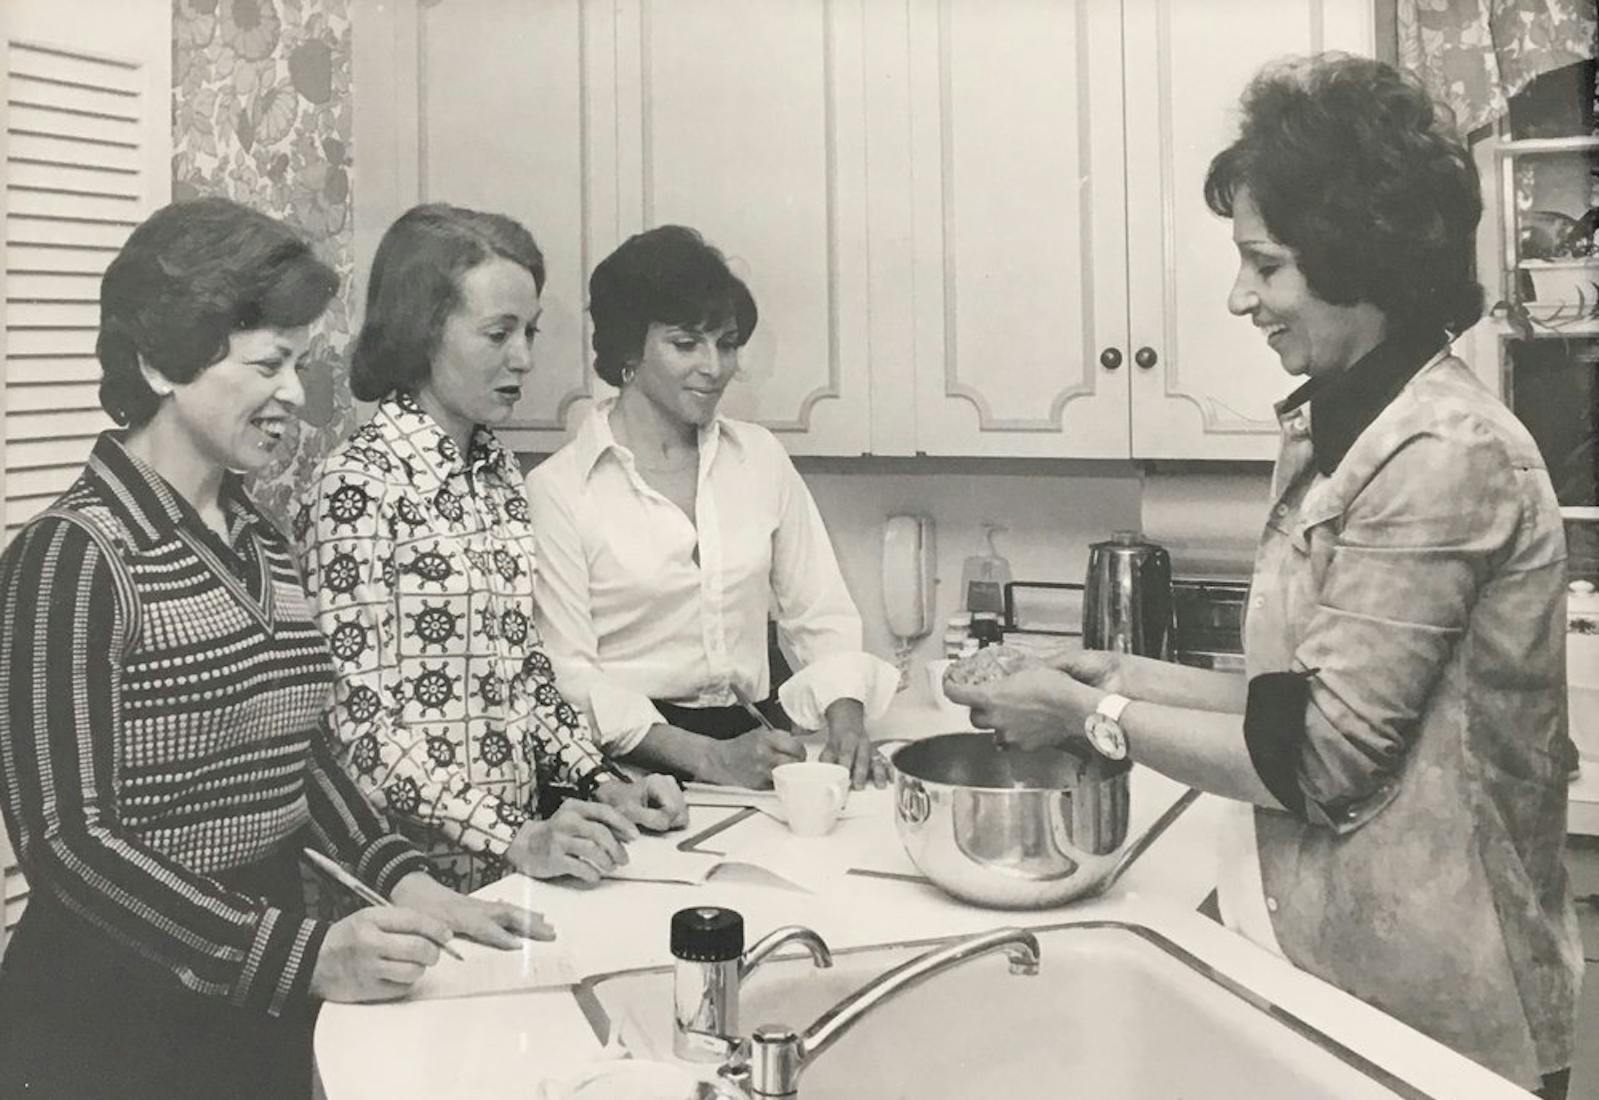 Etty, on the right, teaching a Persian cooking class to some area housewives in Providence, Rhode Island.